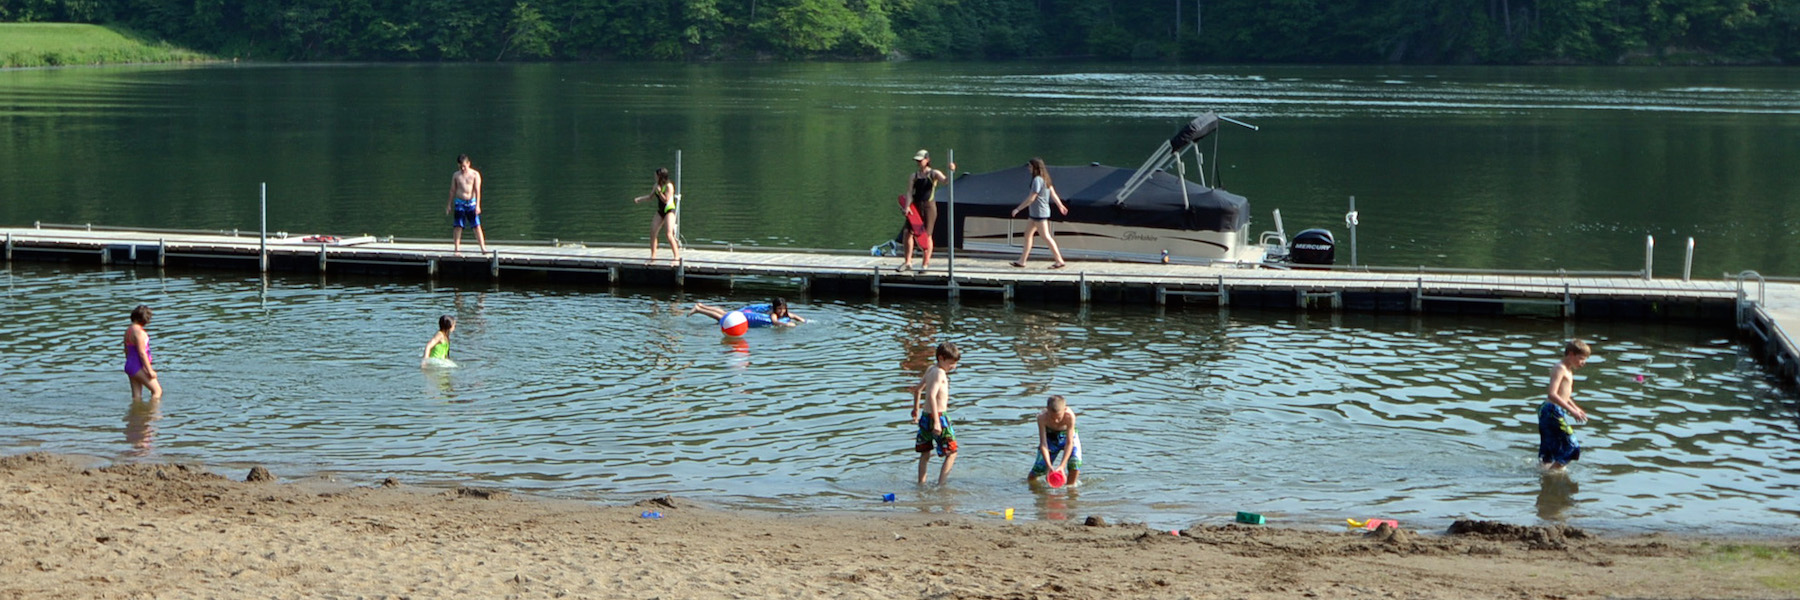 People standing on a dock, swimming, and playing on a beach.